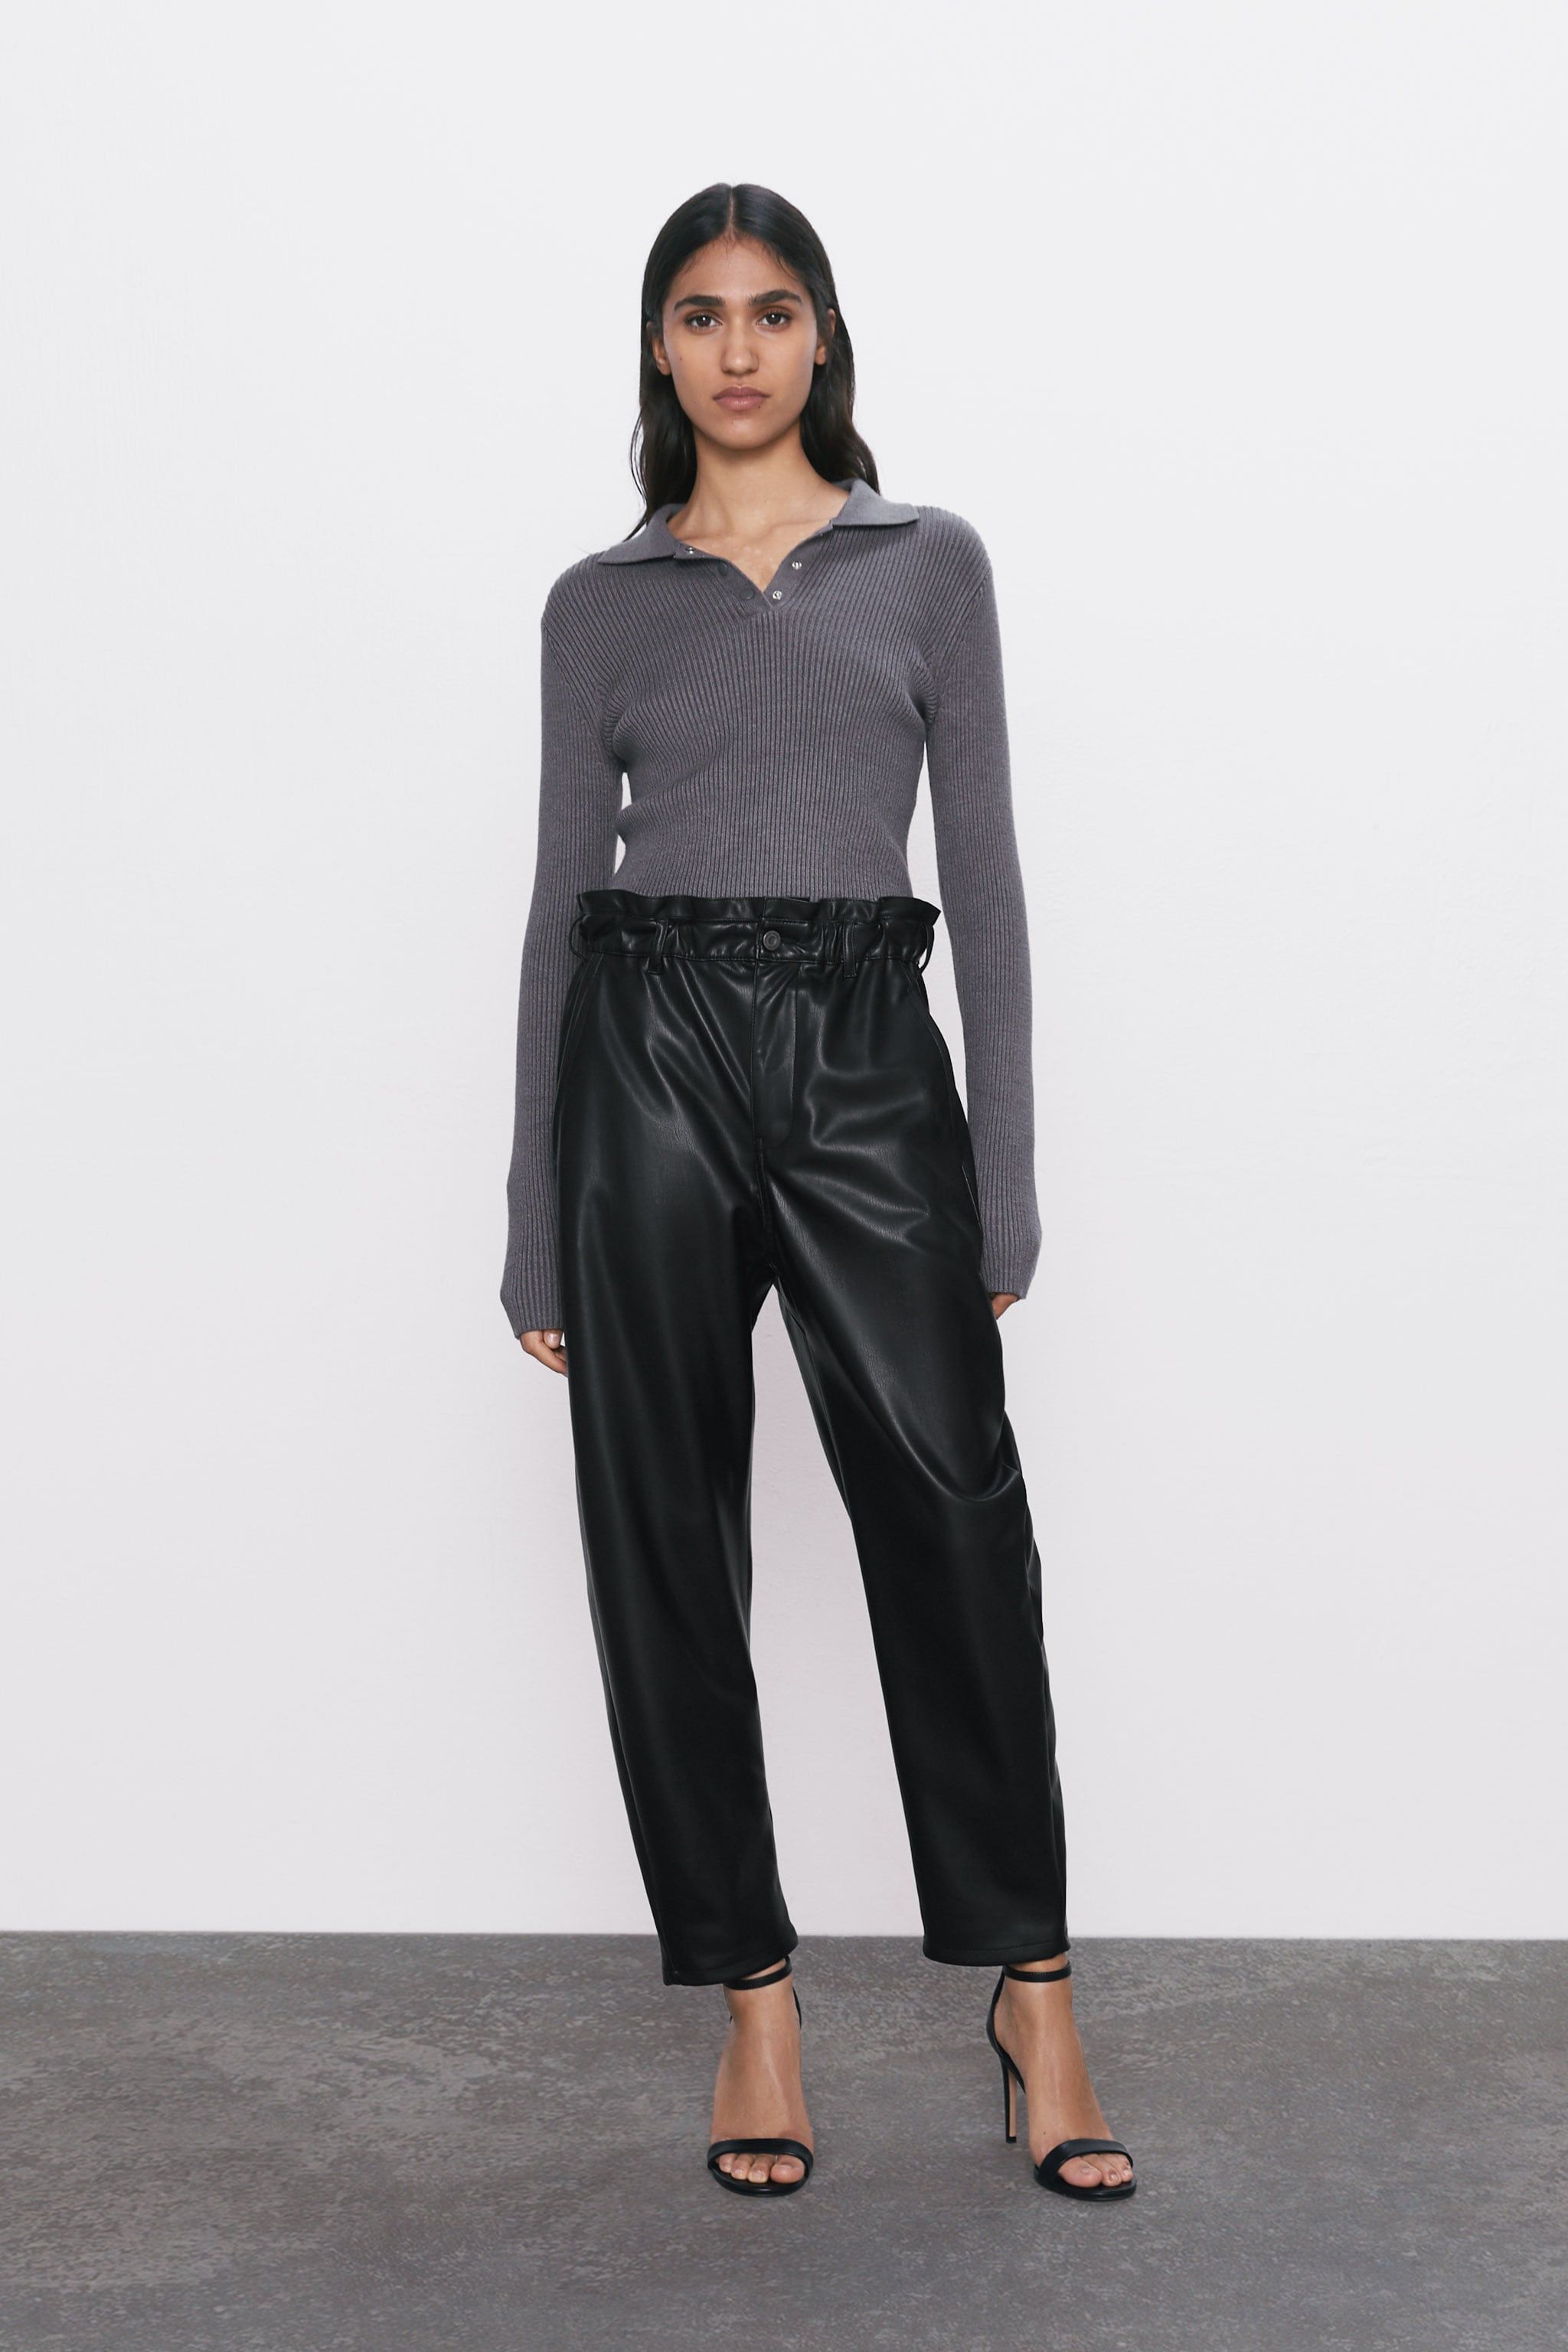 25 Zara Outfits That Will Earn You Instant Compliments – Outlet119